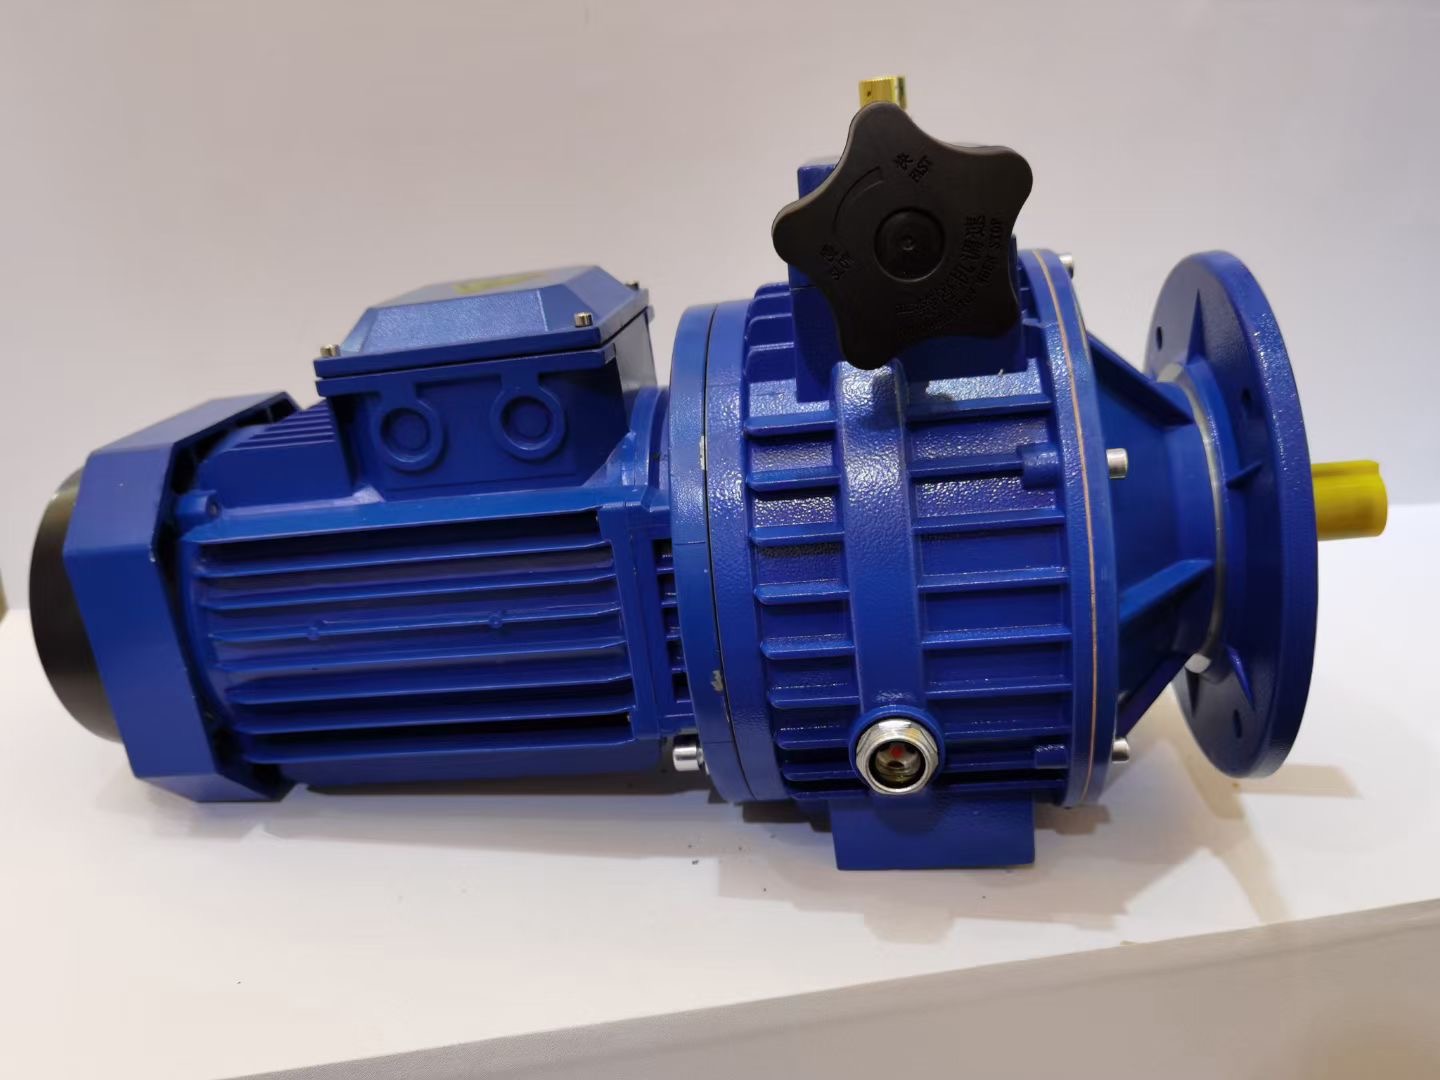 Gear motor with 3 Hp,1500Rpm Ratio 1:50 with a helical gear